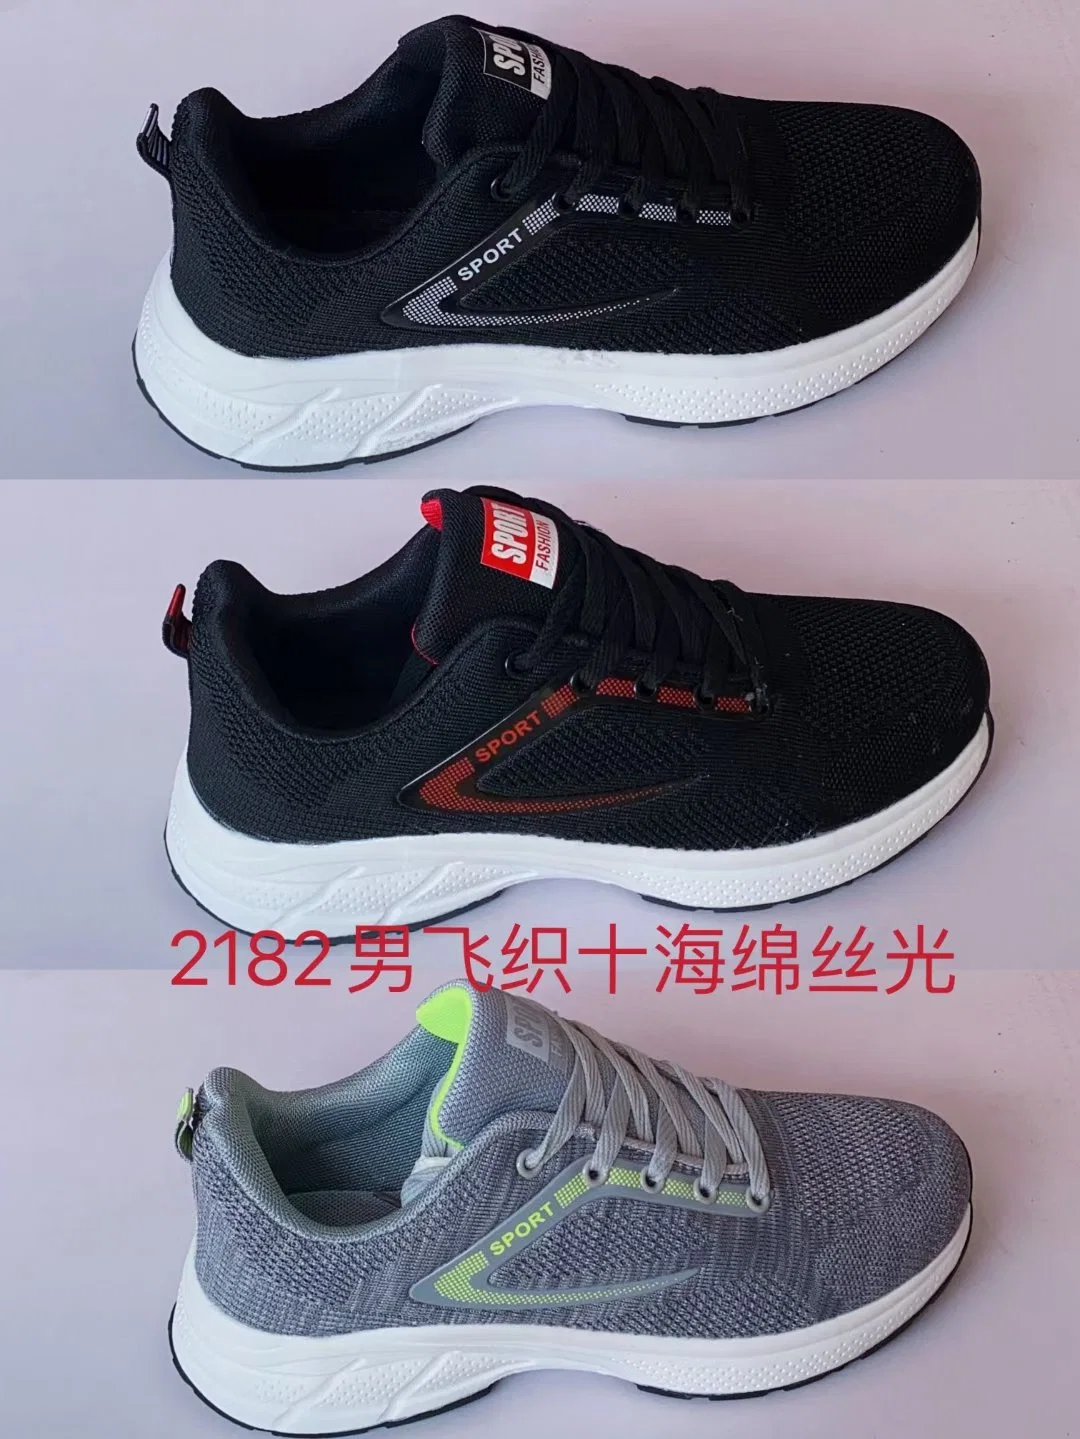 New Style Fashion Special Design Men and Women Footwear Shoes, China Manufacture High quality/High cost performance  Comfortable Breathable Casual Shoes Running Leisure Shoes